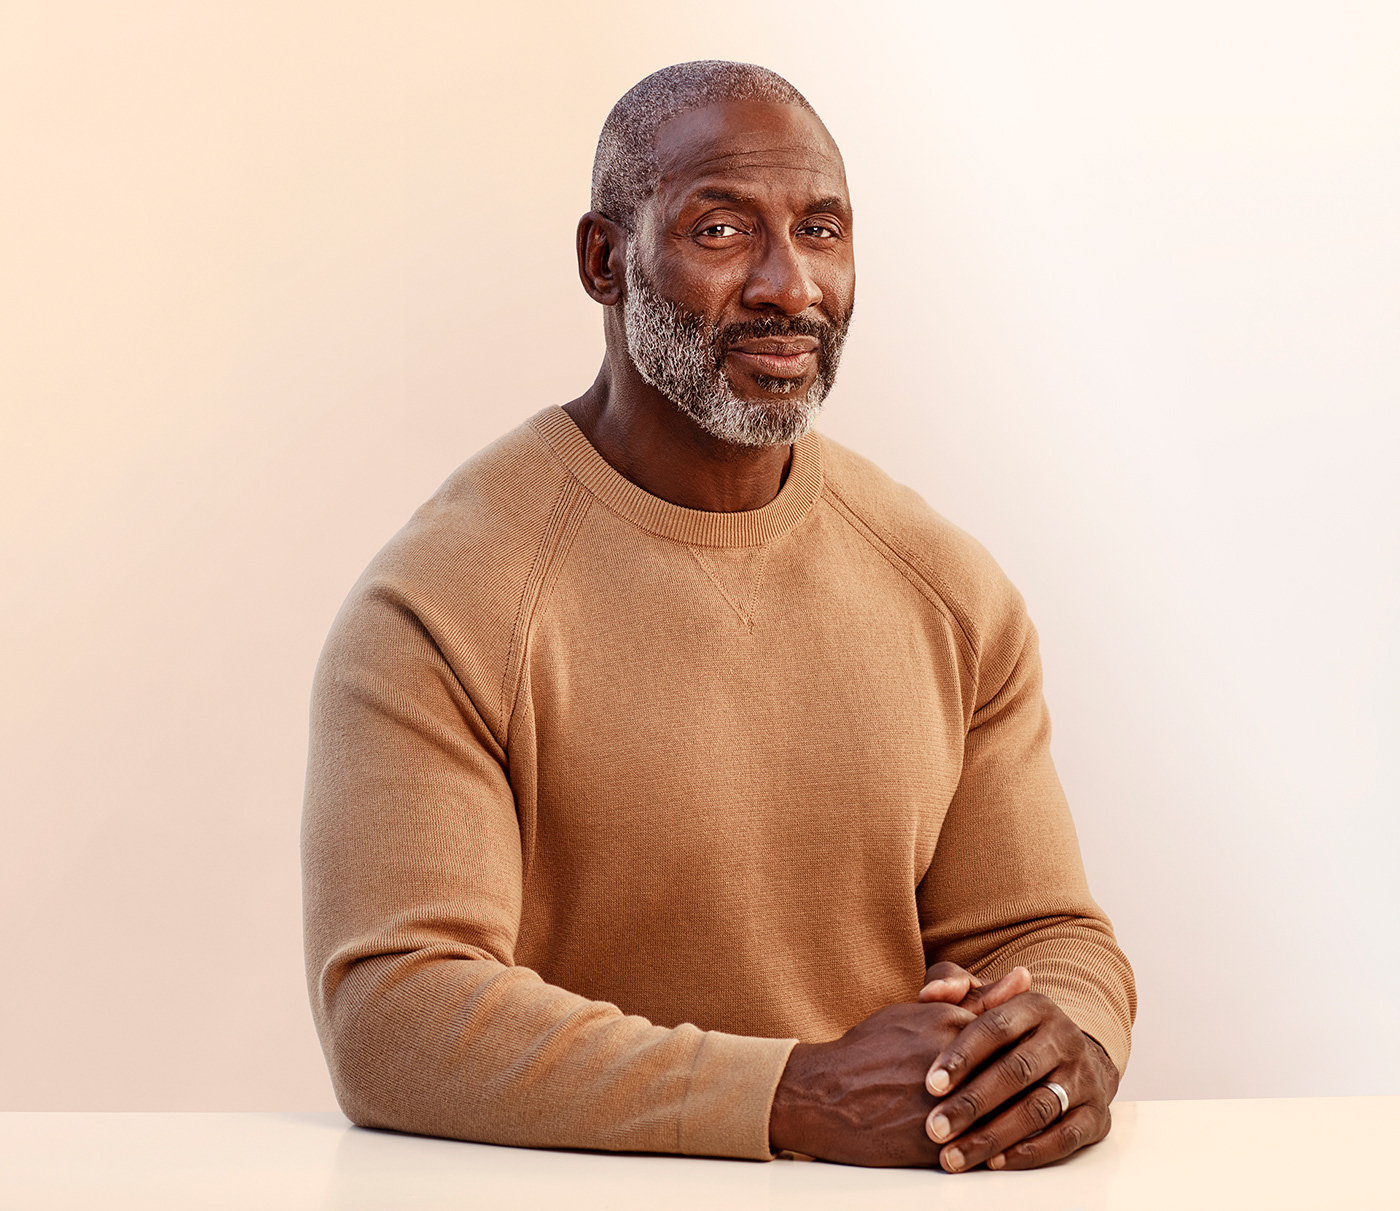 Black man in neutral tan sweater with hands folded gazing straight at camera with neutral expression